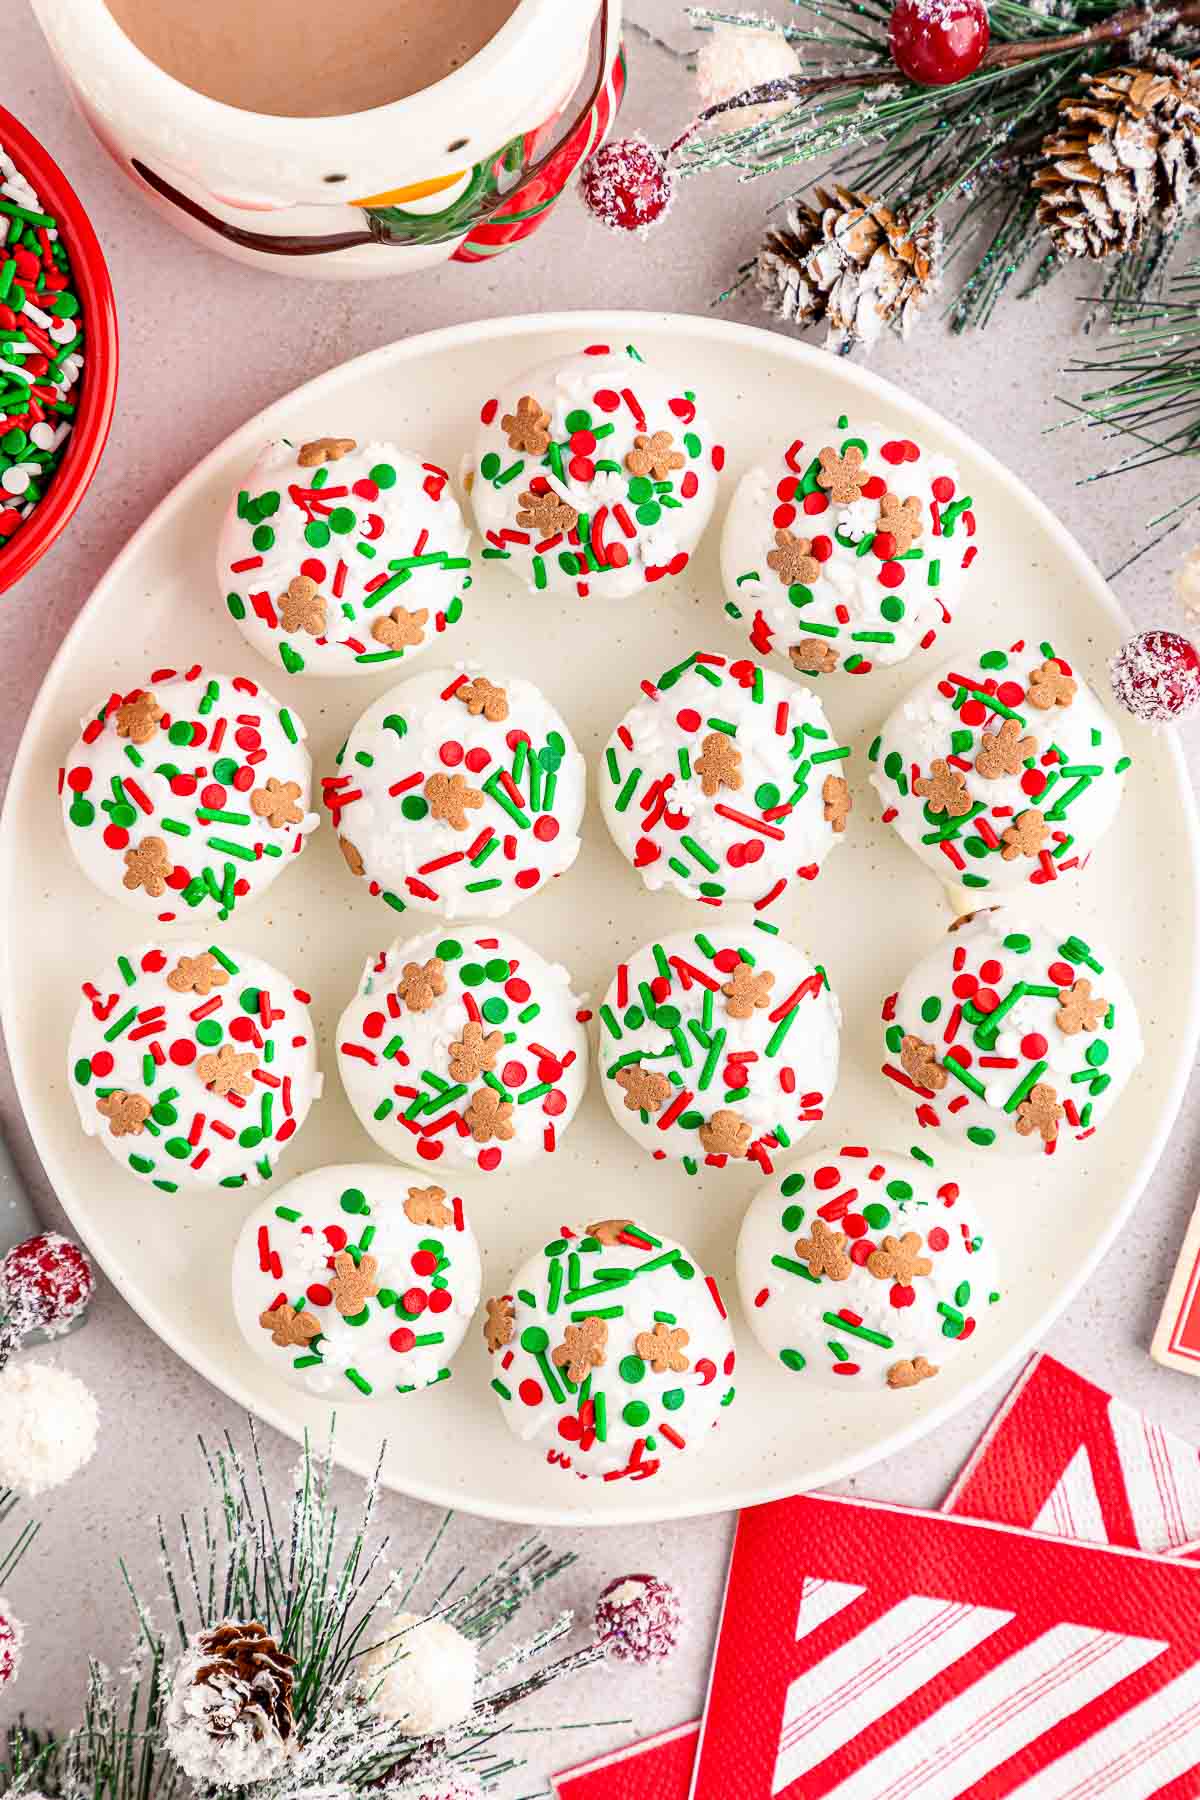 Several gingerbread truffles with sprinkles on a white plate.